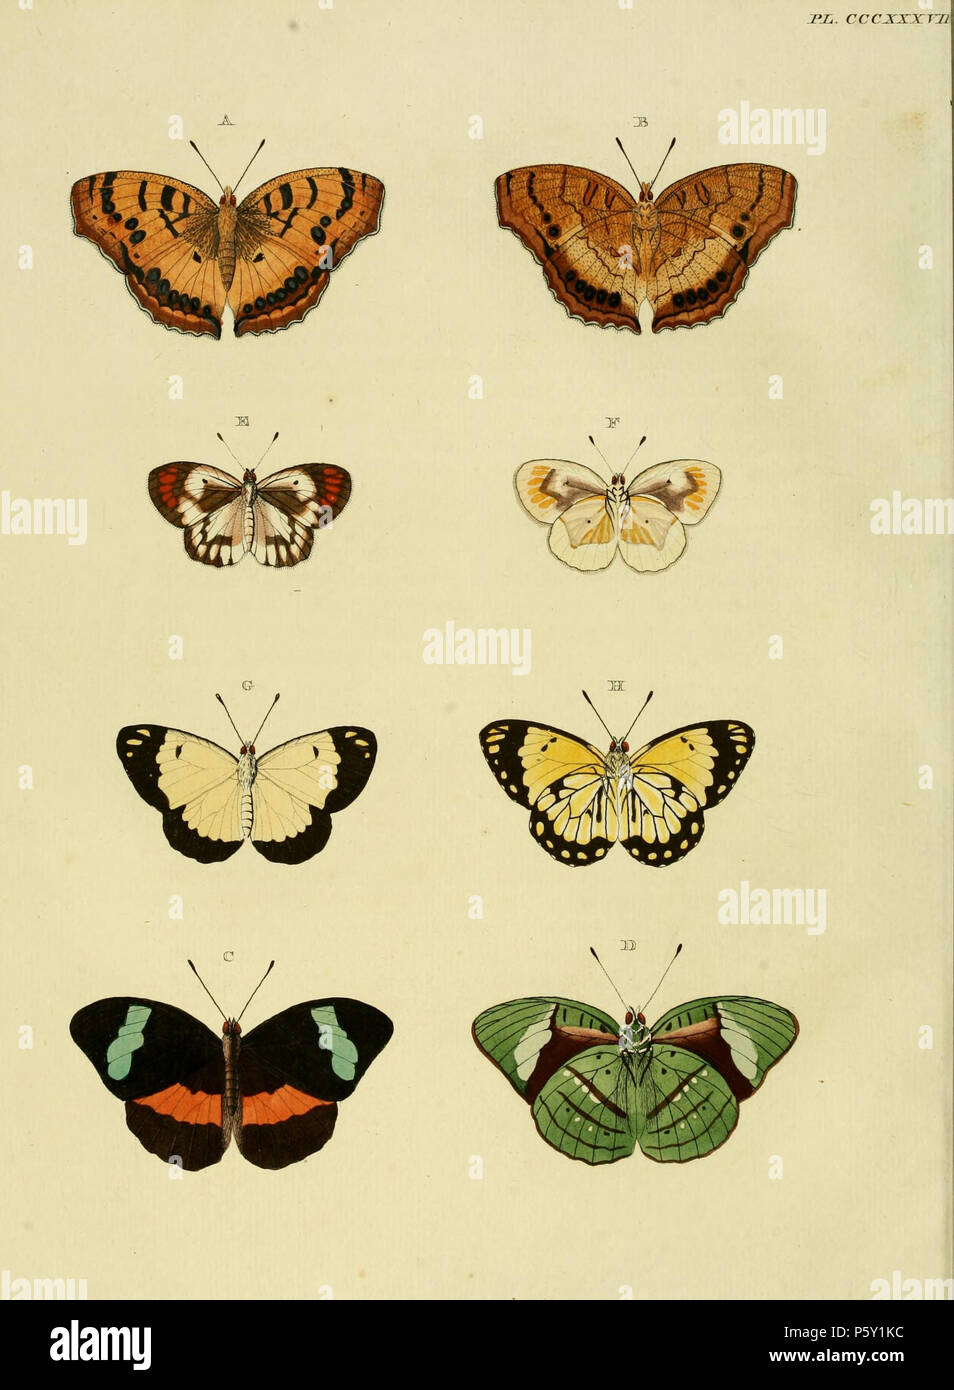 N/A. Plate CCCXXXVIII Warning: some taxa/names may be misidentified/misapplied or placed in a different genus.  A, B: '(Papilio) Cloanthe' ( = Catacroptera cloanthe (Stoll, [1781]), iconotype, see Funet). Photos at Biodiversity Explorer, RSA.  C, D: '(Papilio) Ancaea' or (in text) 'Pap(ilio) Obrinus' ( = Nessaea obrinus (C. Linnaeus, 1771), see Funet). Photos at Butterflies of America.  Also on pl. 49 E, F as '(Papilio) Obrinus'.  E, F: '(Papilio) Achine' ( = Colotis antevippe (Cramer, [1779]), iconotype), see Funet). Photos at Barcode of Life.  G, H: '(Papilio) Severina' ( = Belenois creona s Stock Photo